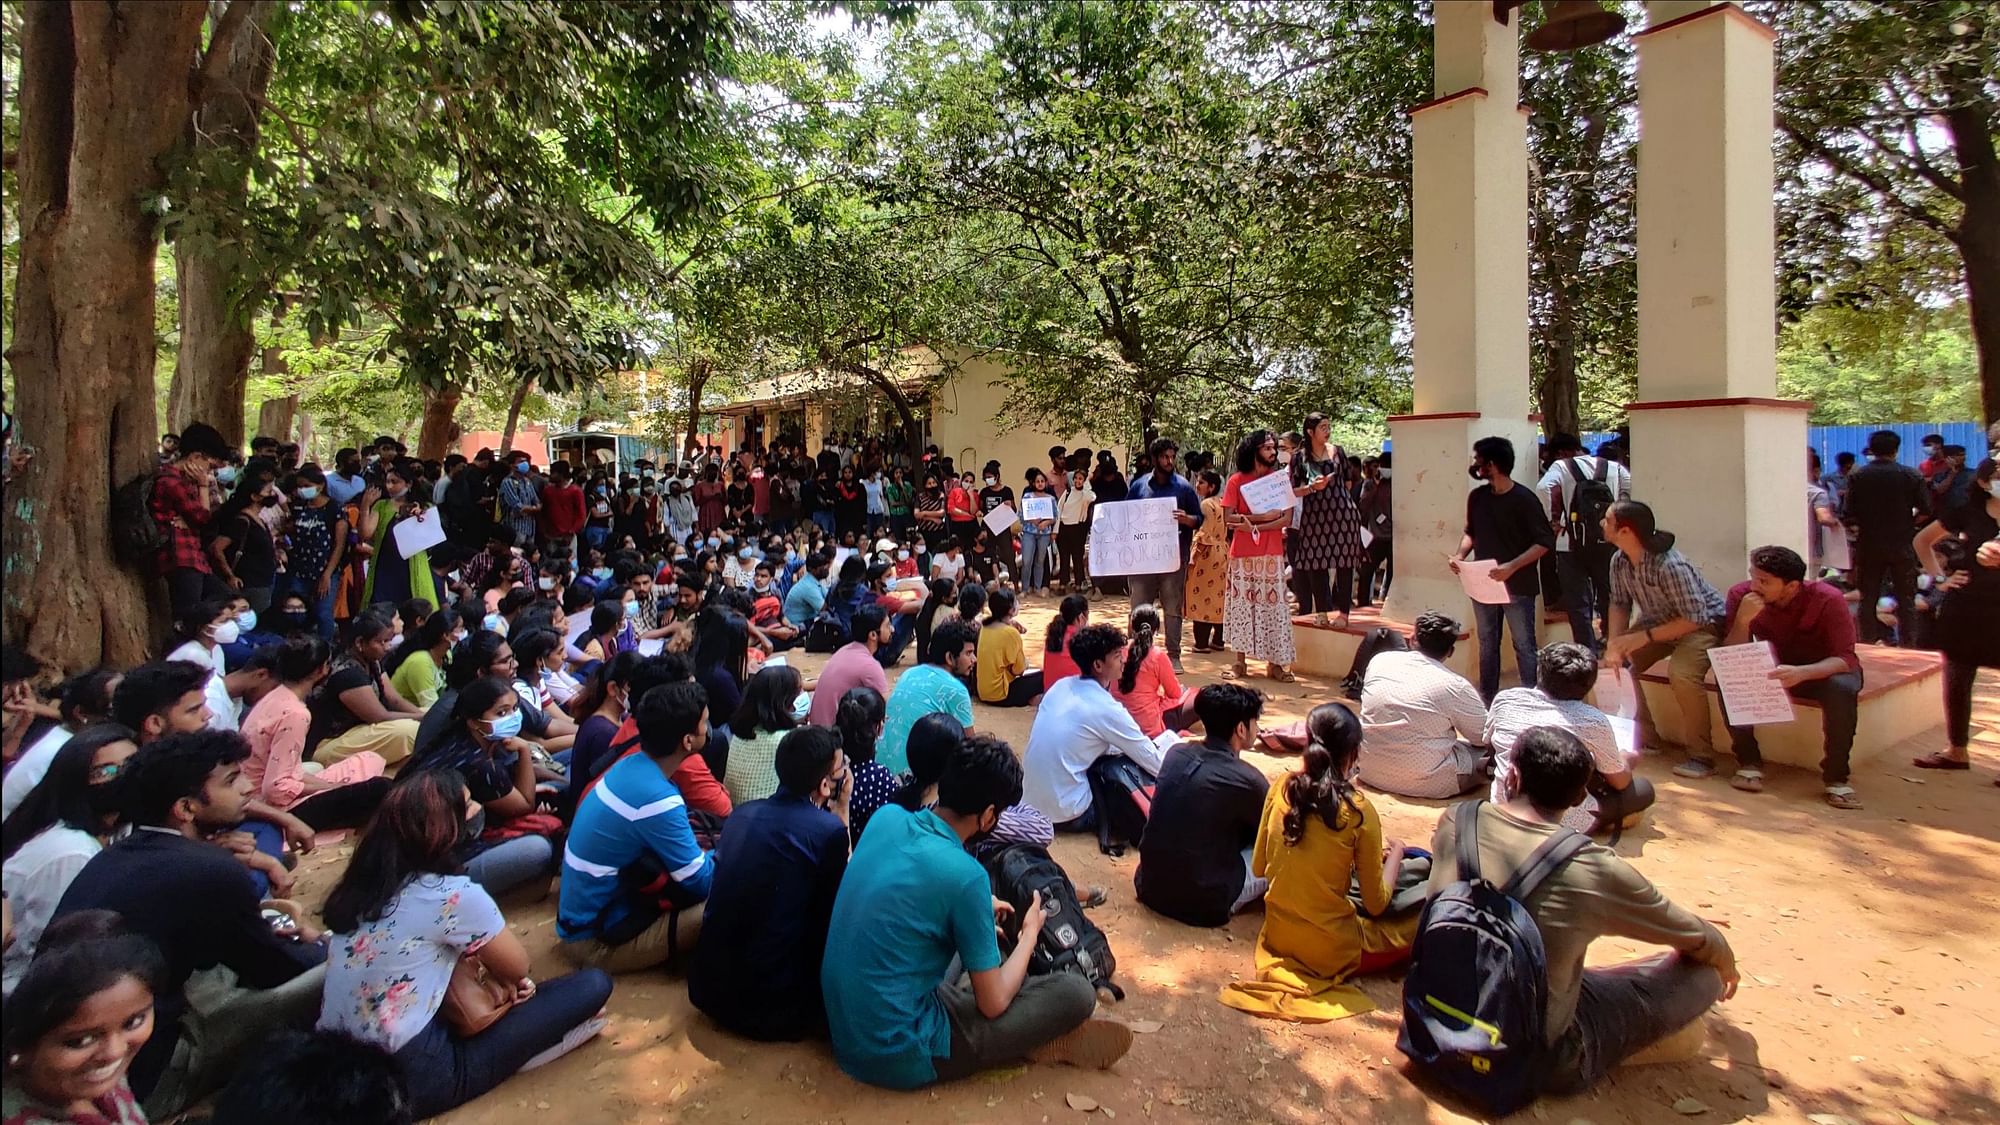 <div class="paragraphs"><p>The college union society also submitted a petition with 11 grievances, including complaints of misogyny and sexism within the college campus.</p></div>